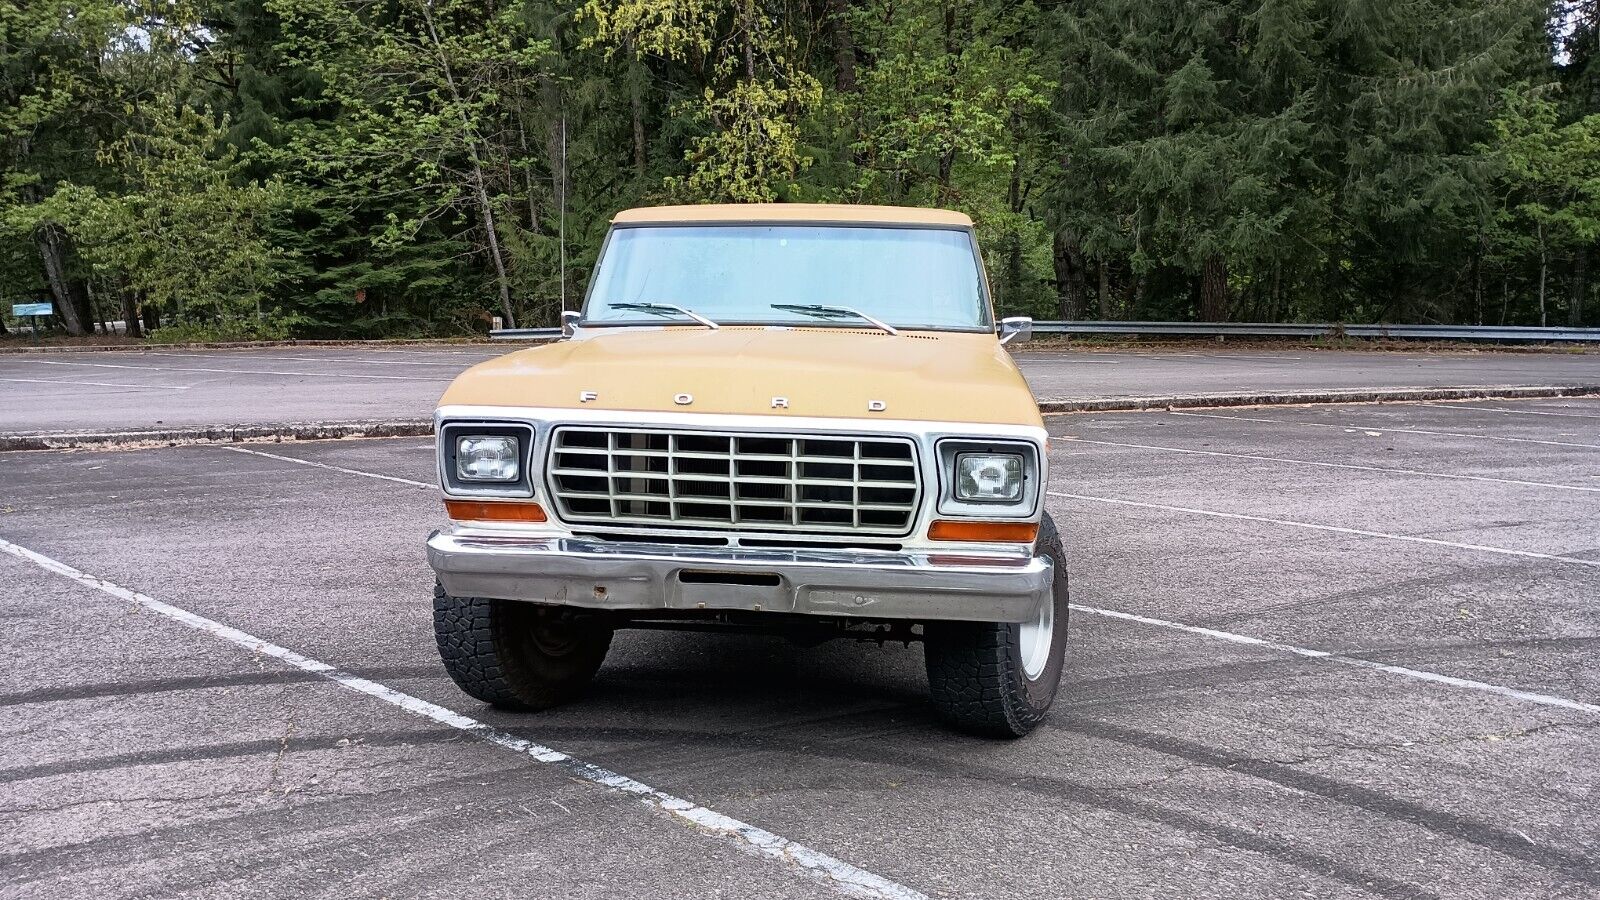 Owner 1979 Ford F150 4x4 , 4spd, 300 ci, Running/driving truck, over 200+ photos/video